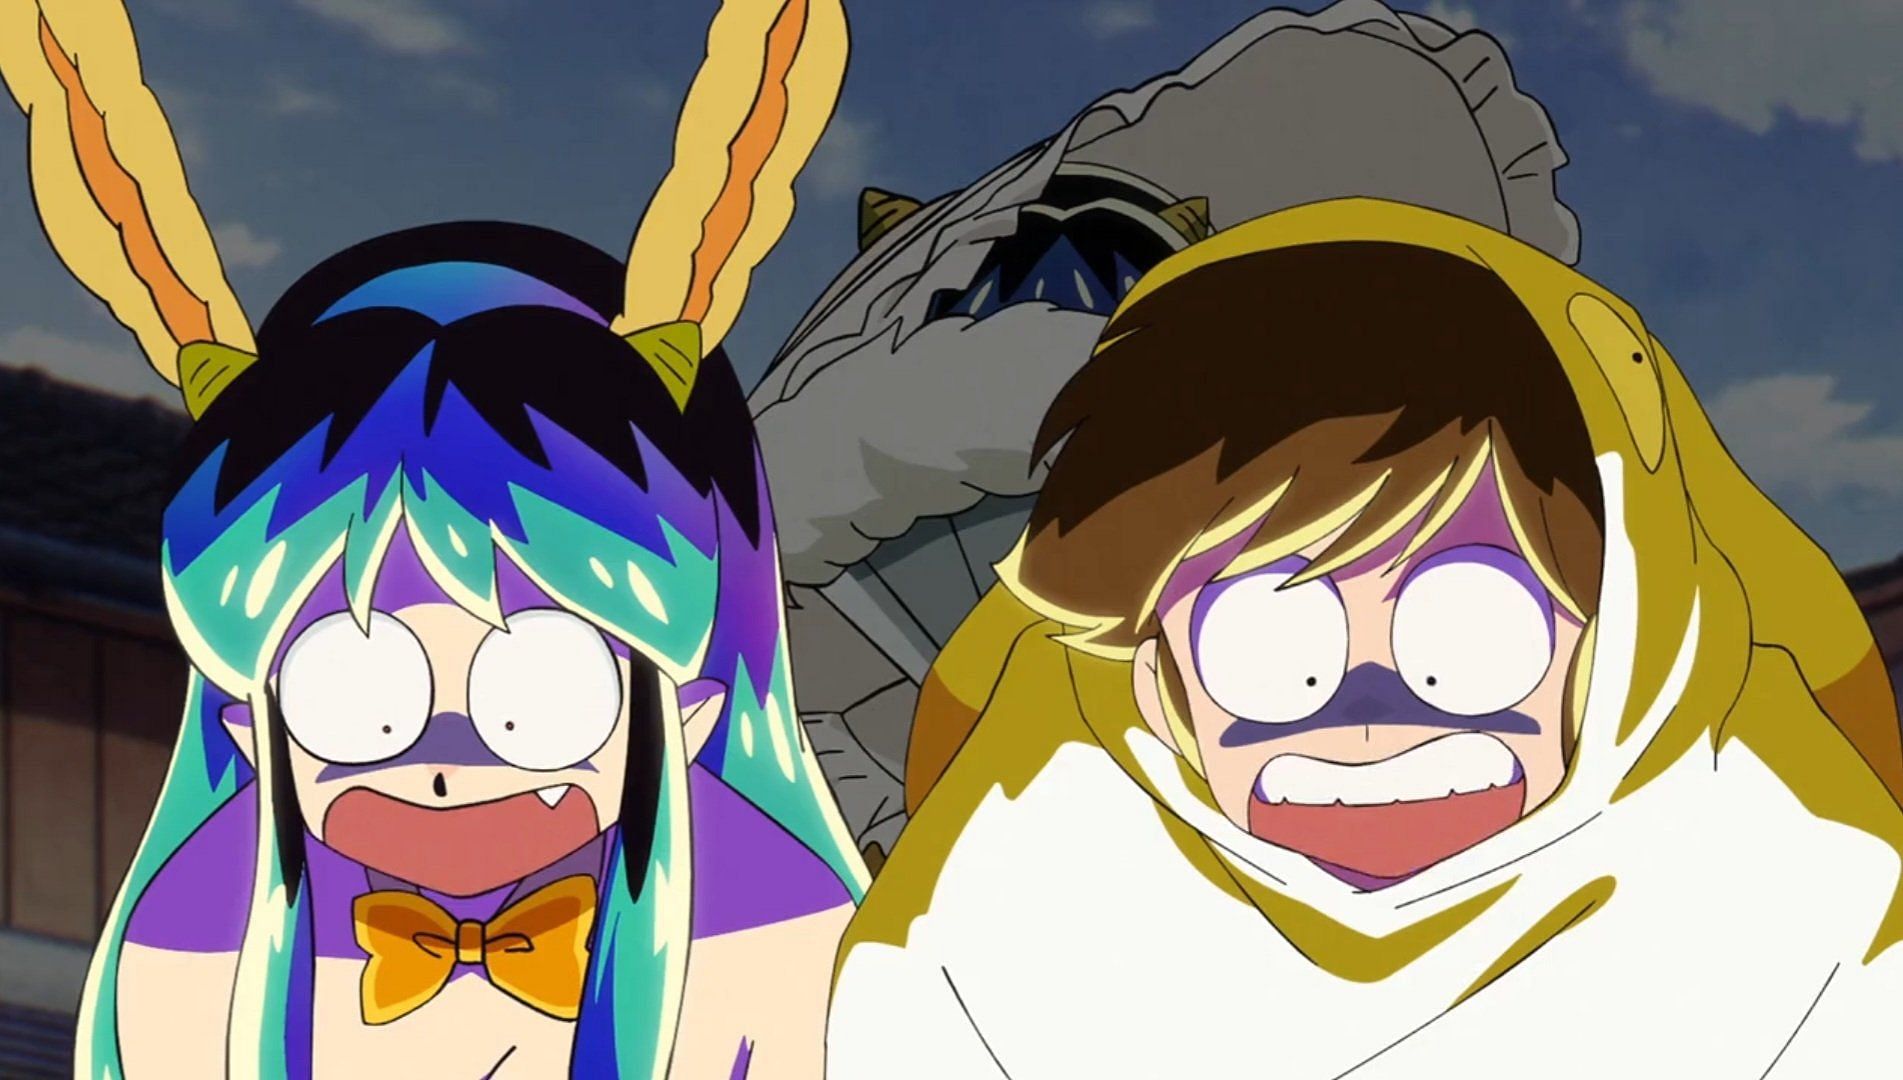 Lum and Ataru seeing one of their possible futures (Image via David Production)